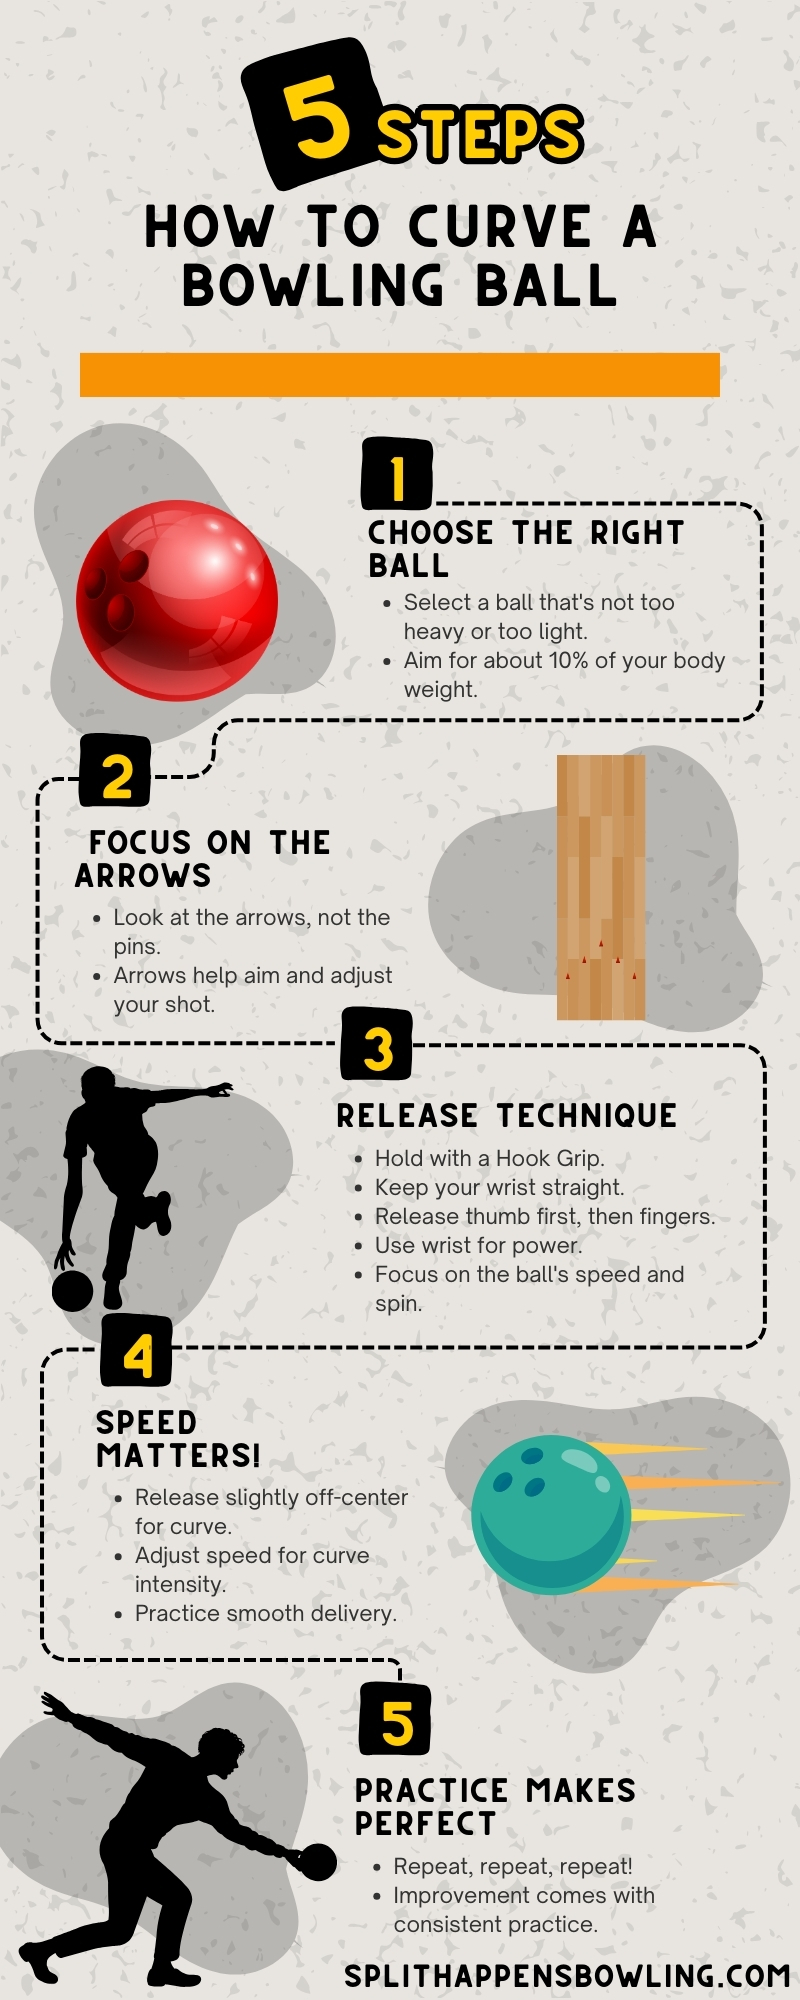 How To Curve a Bowling Ball Infographic